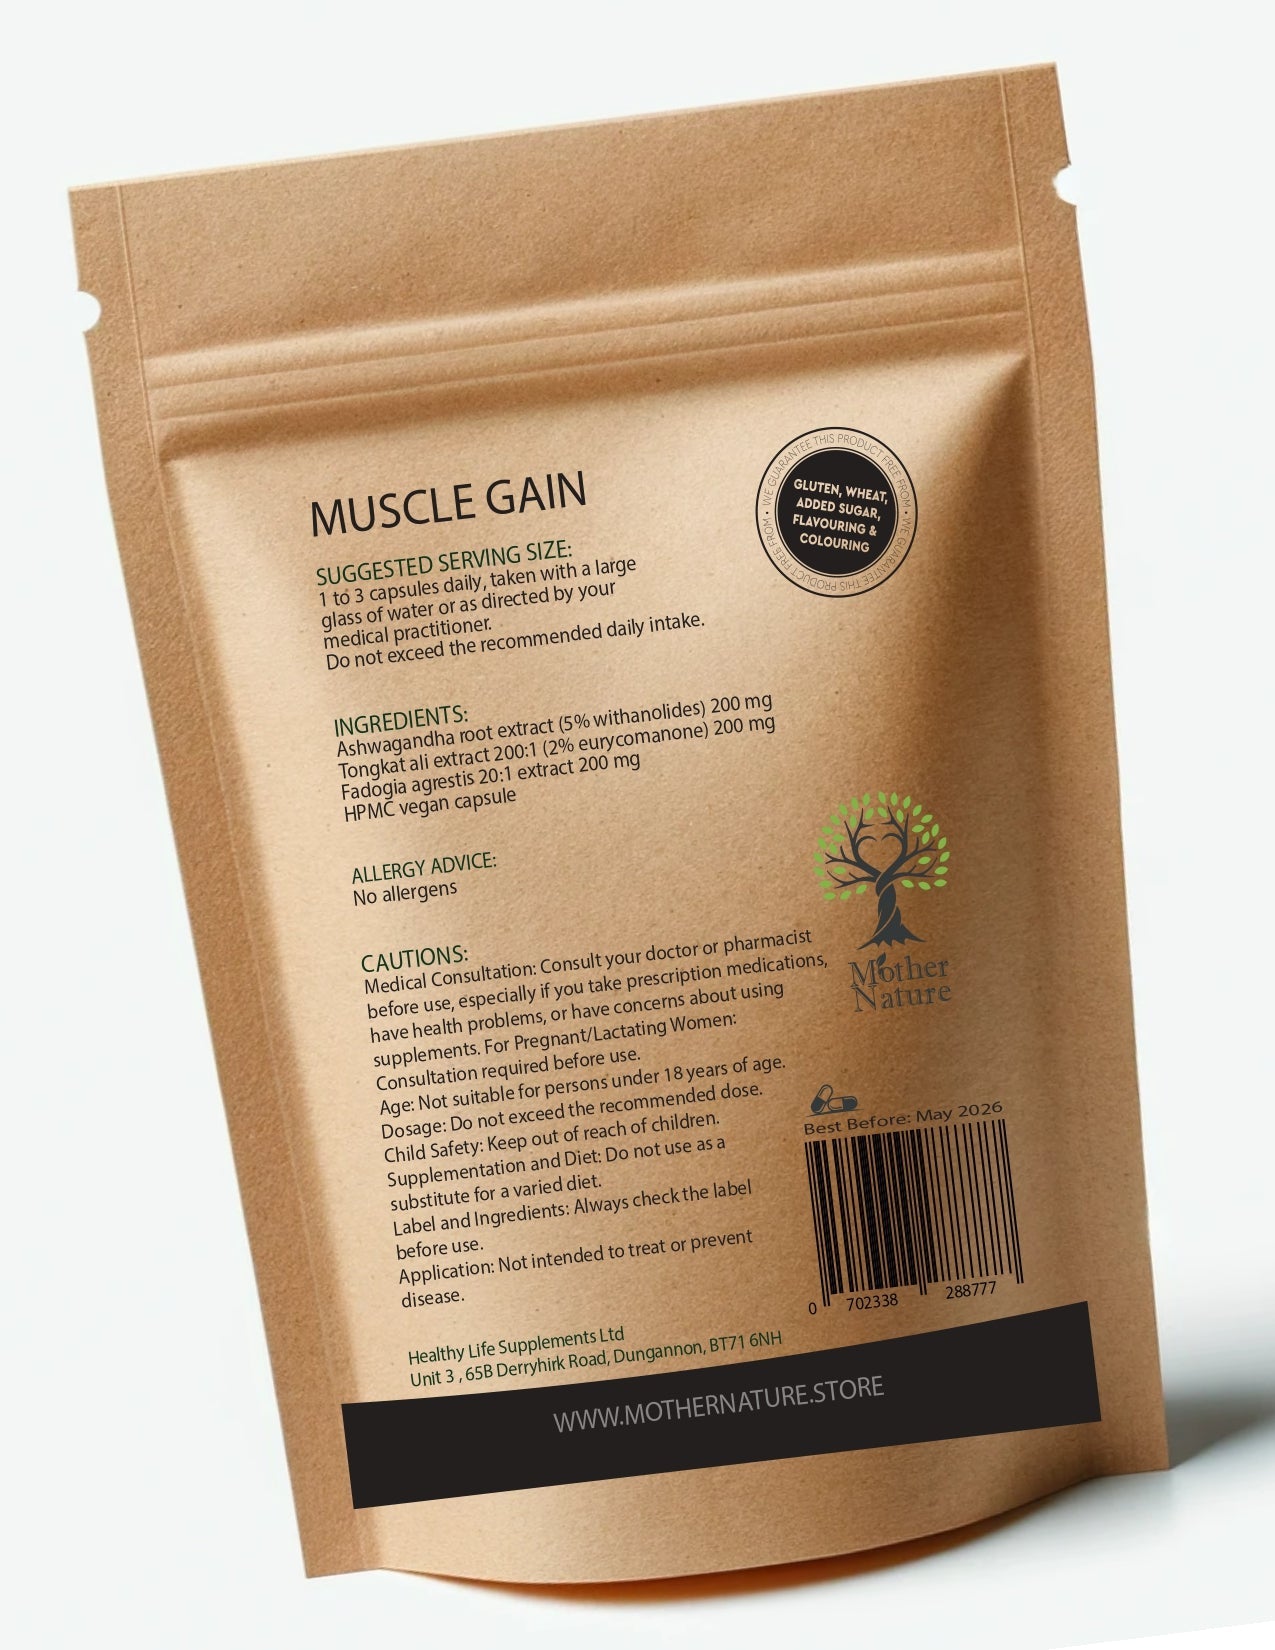 Muscle Gain Capsules 600mg High Potency Clean Natural Herbs Eco - friendly Best Vegan Supplements Plant - based Holistic Health - MOTHER NATURE SUPPLEMENTSMuscle Gain Capsules 600mg High Potency Clean Natural Herbs Eco - friendly Best Vegan Supplements Plant - based Holistic Health